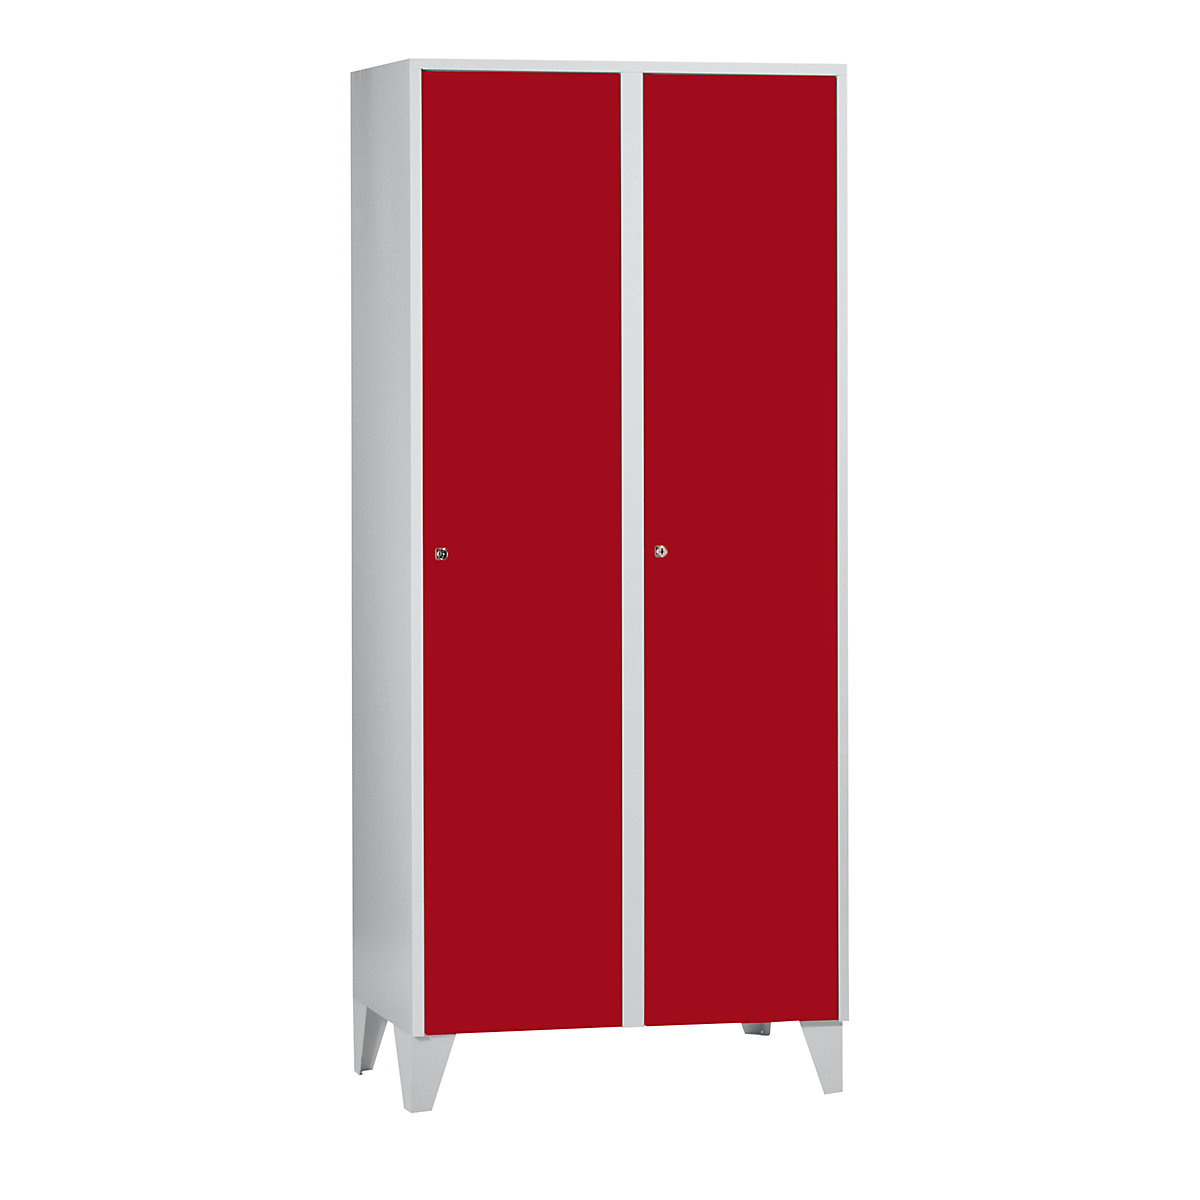 Cloakroom locker with feet – Wolf, HxWxD 1850 x 800 x 500 mm, 2 compartments, flame red-3